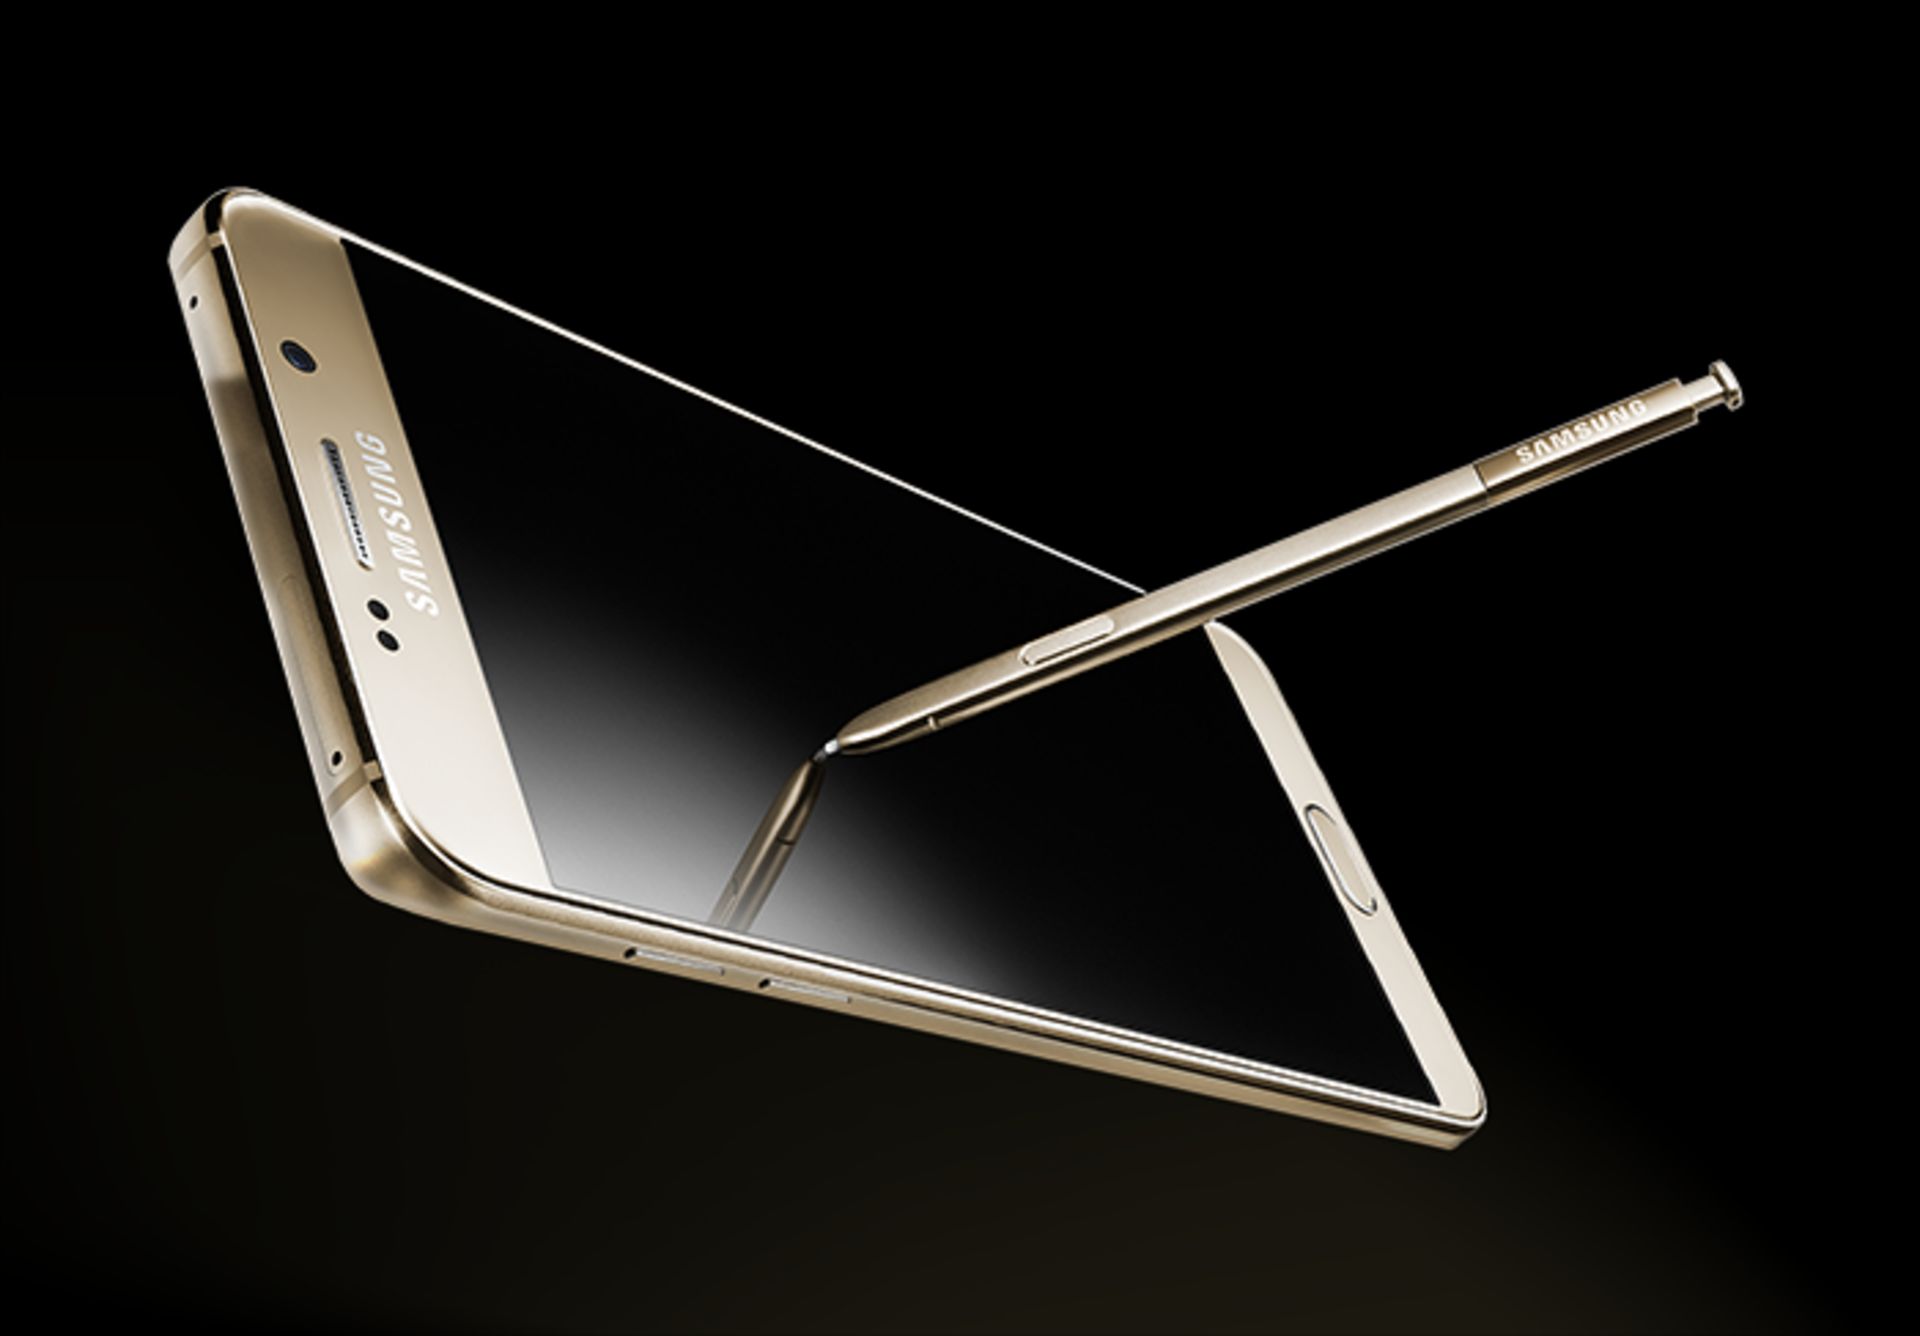 galaxy note5 design feature note5